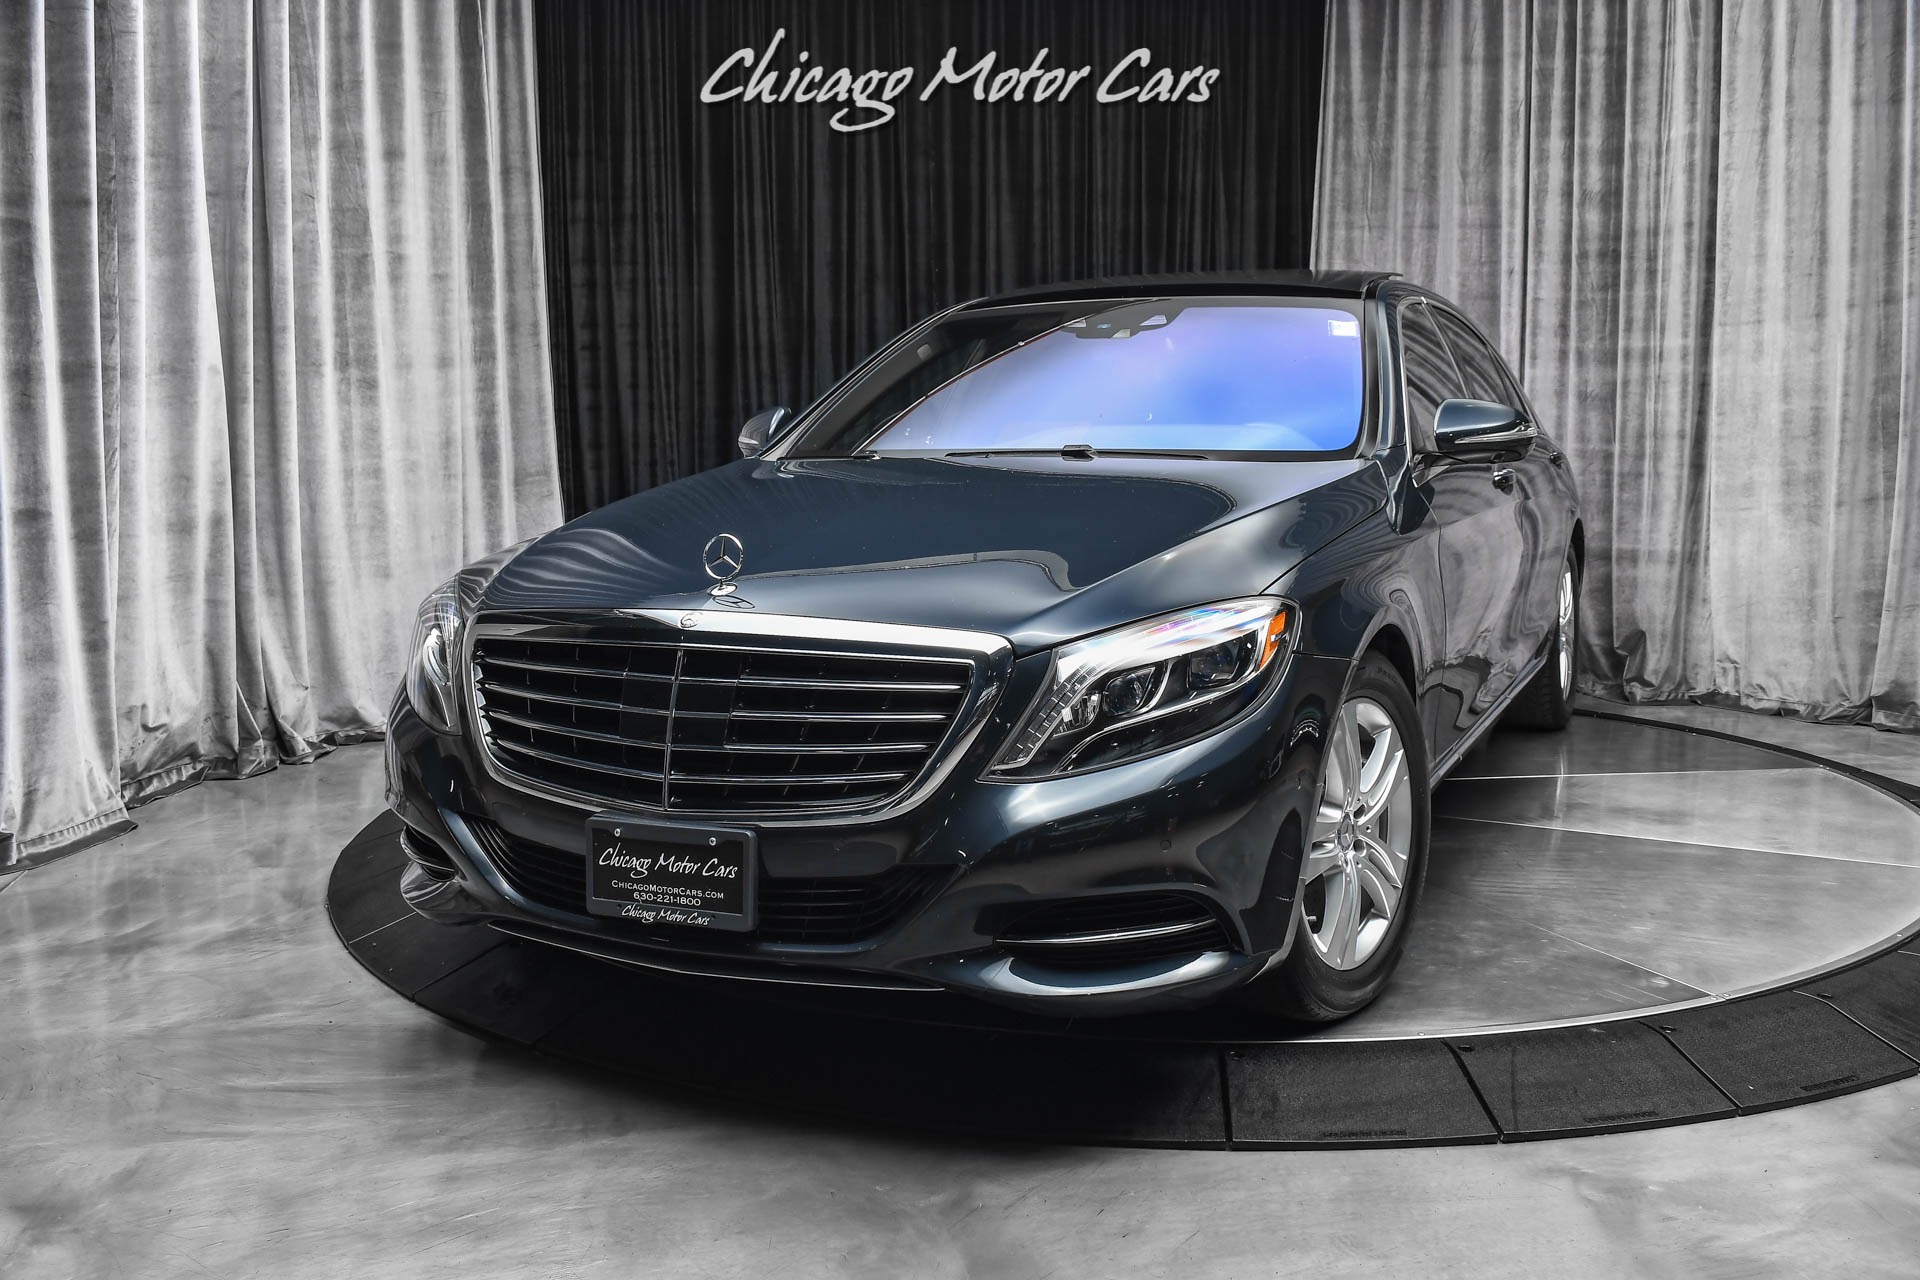 Used-2017-Mercedes-Benz-S550-4-Matic-133kMSRP-Rear-Entertainment-Loaded-Executive-Seating